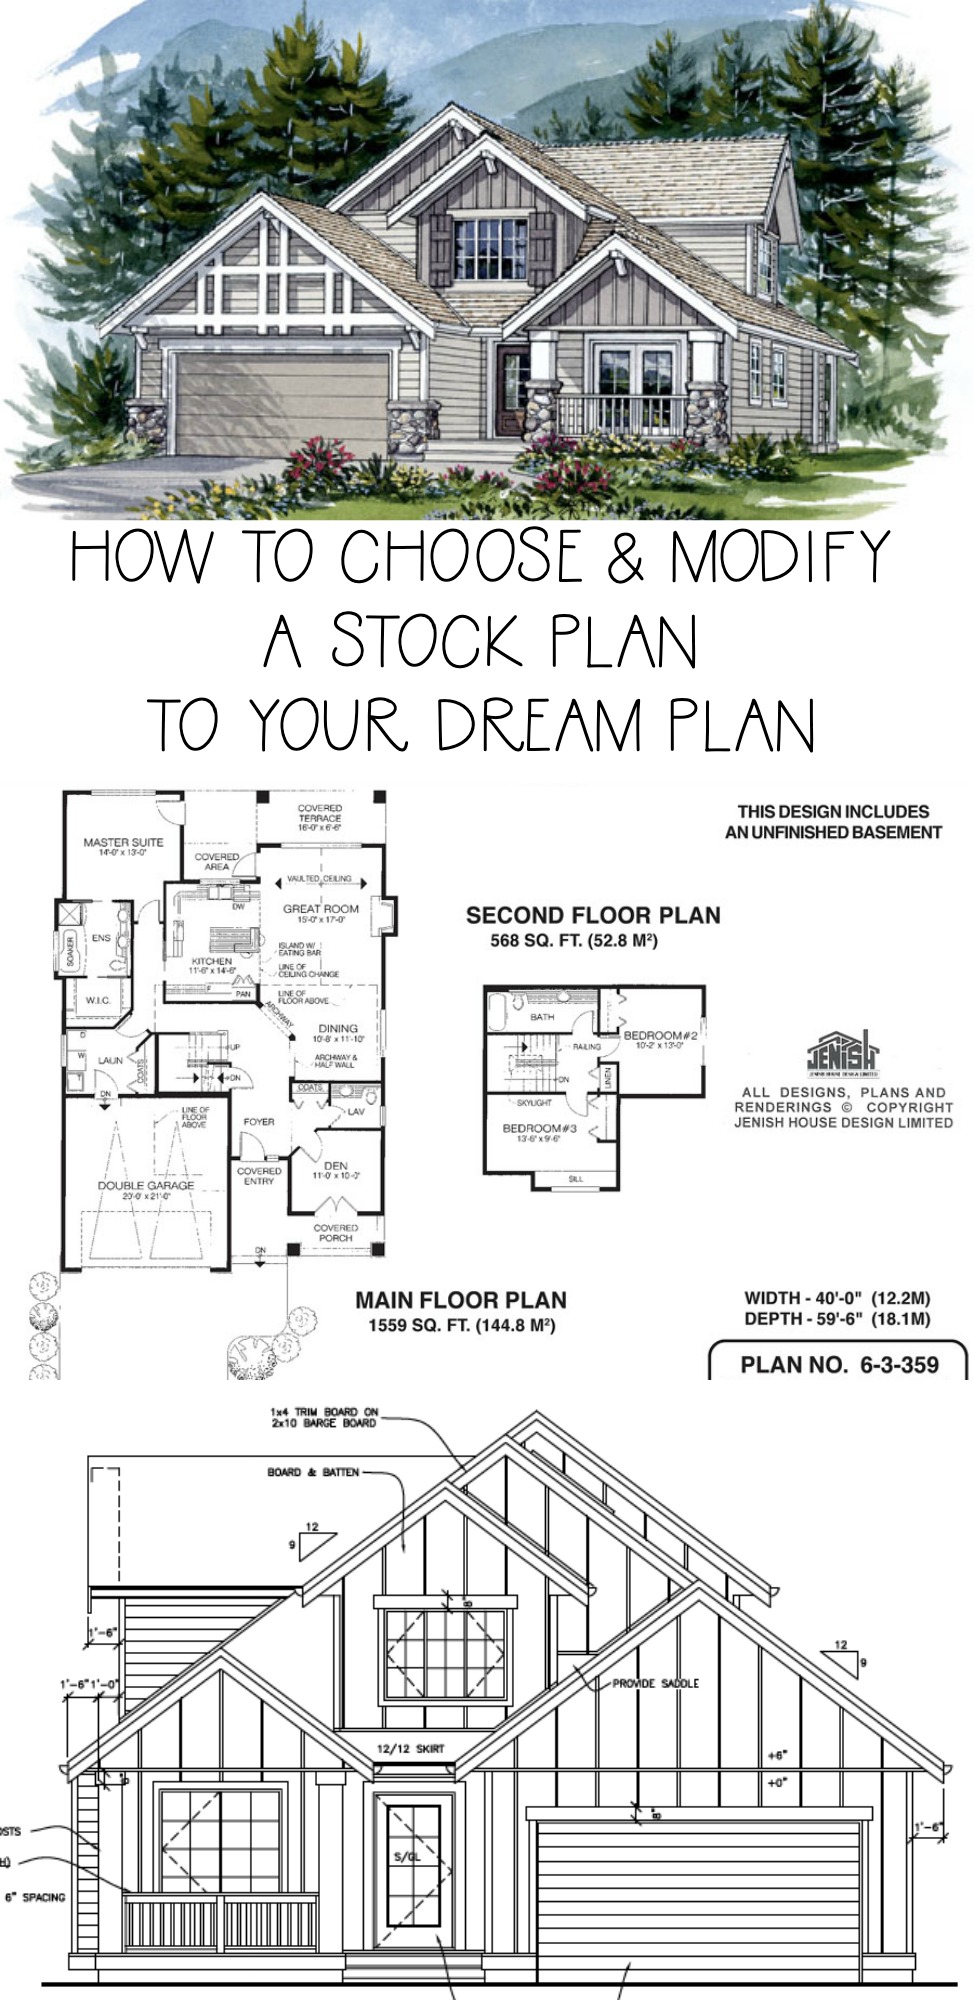 How To Choose & Modify A Stock Plan To Your Dream Plan graphic.